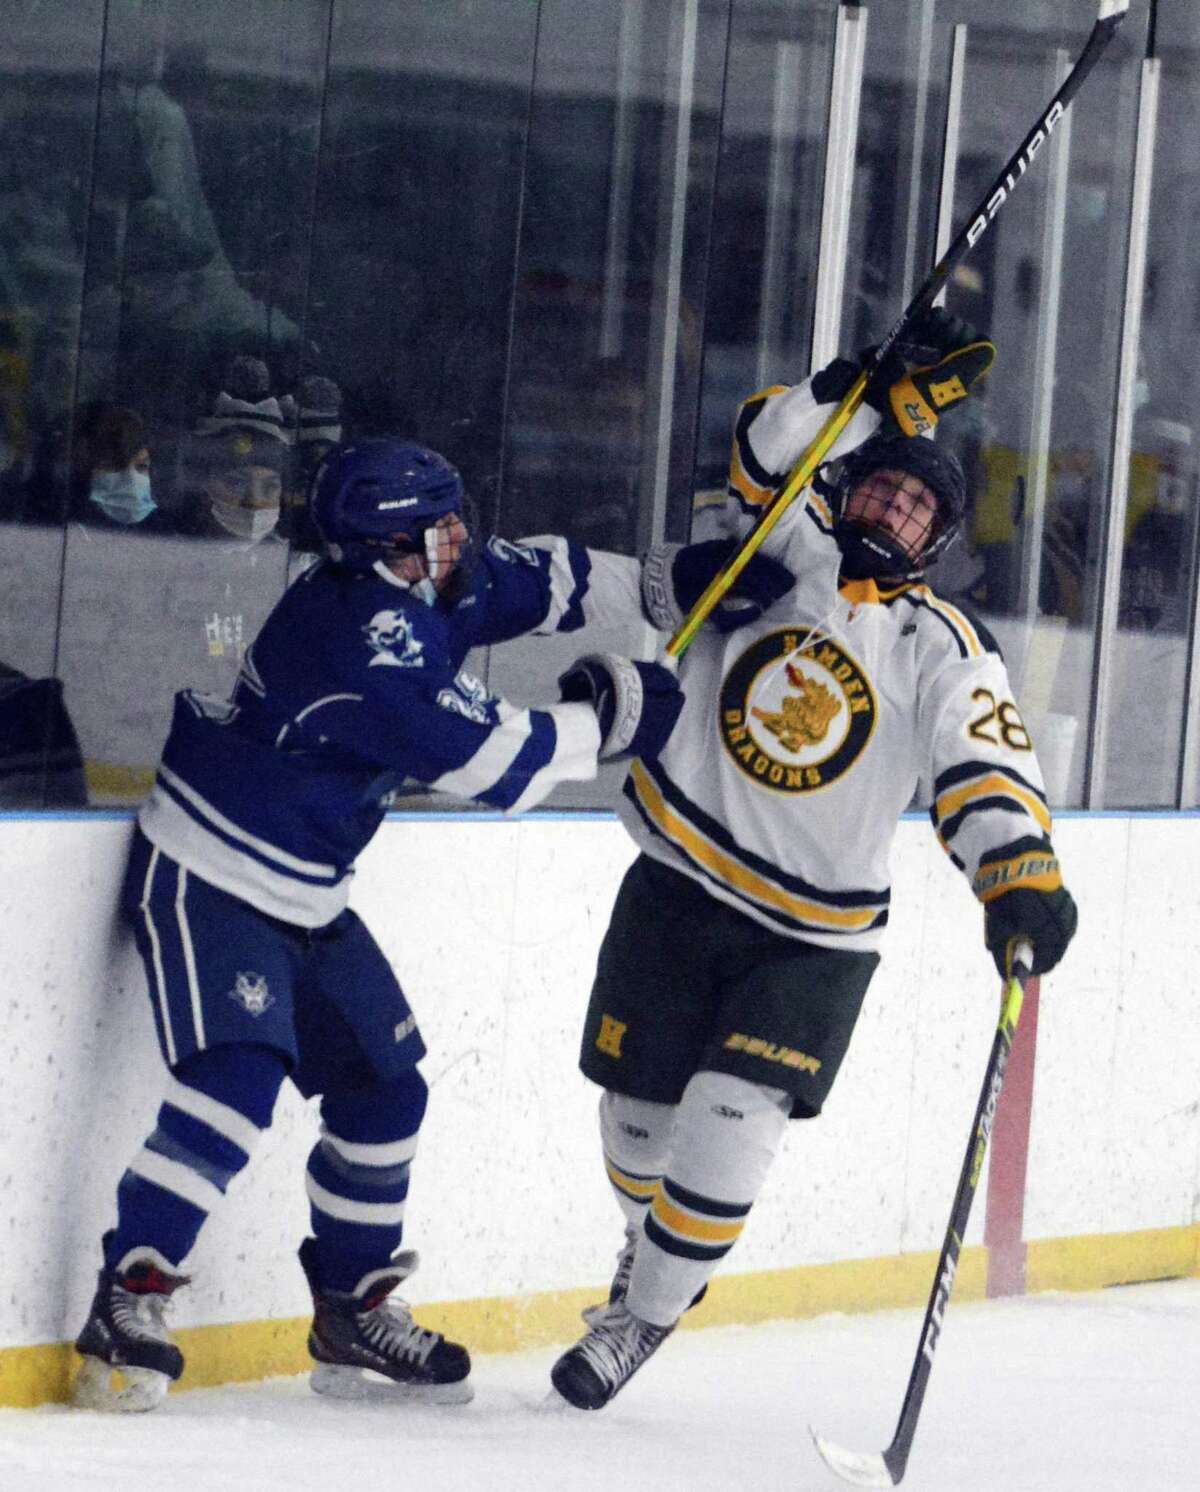 Anthony Malonis of Hamden knocks the puck out of the air during the Green Dragons' 6-3 win Saturday afternoon. Malonis finished with a hat trick in Hamden’s win.